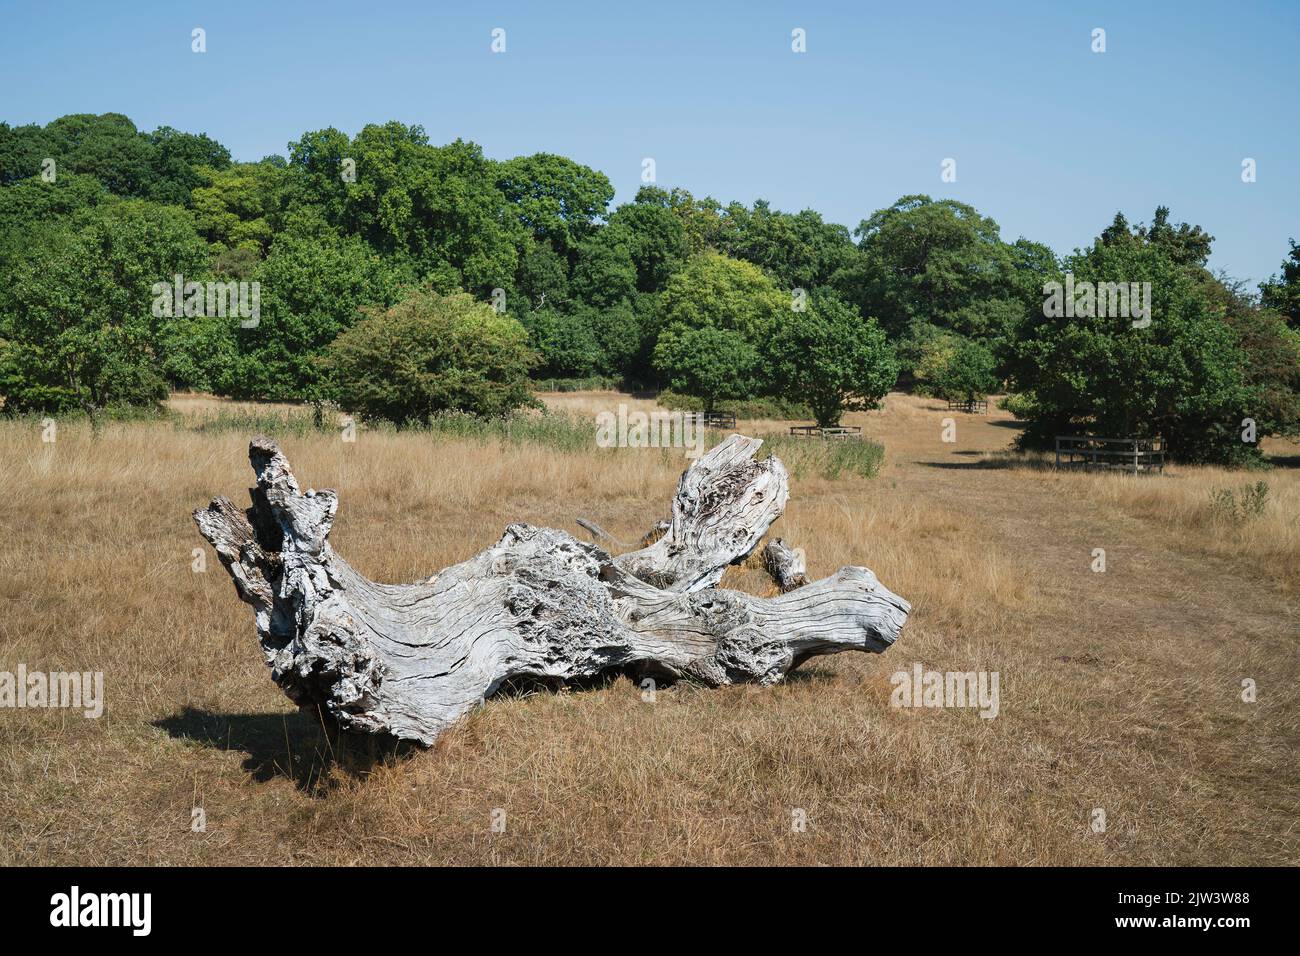 Rotting storm damaged tree surrounded by dry grasses and trees on horizon under blue sky during protracted heatwave on the Westwood in Beverley, Yorks Stock Photo